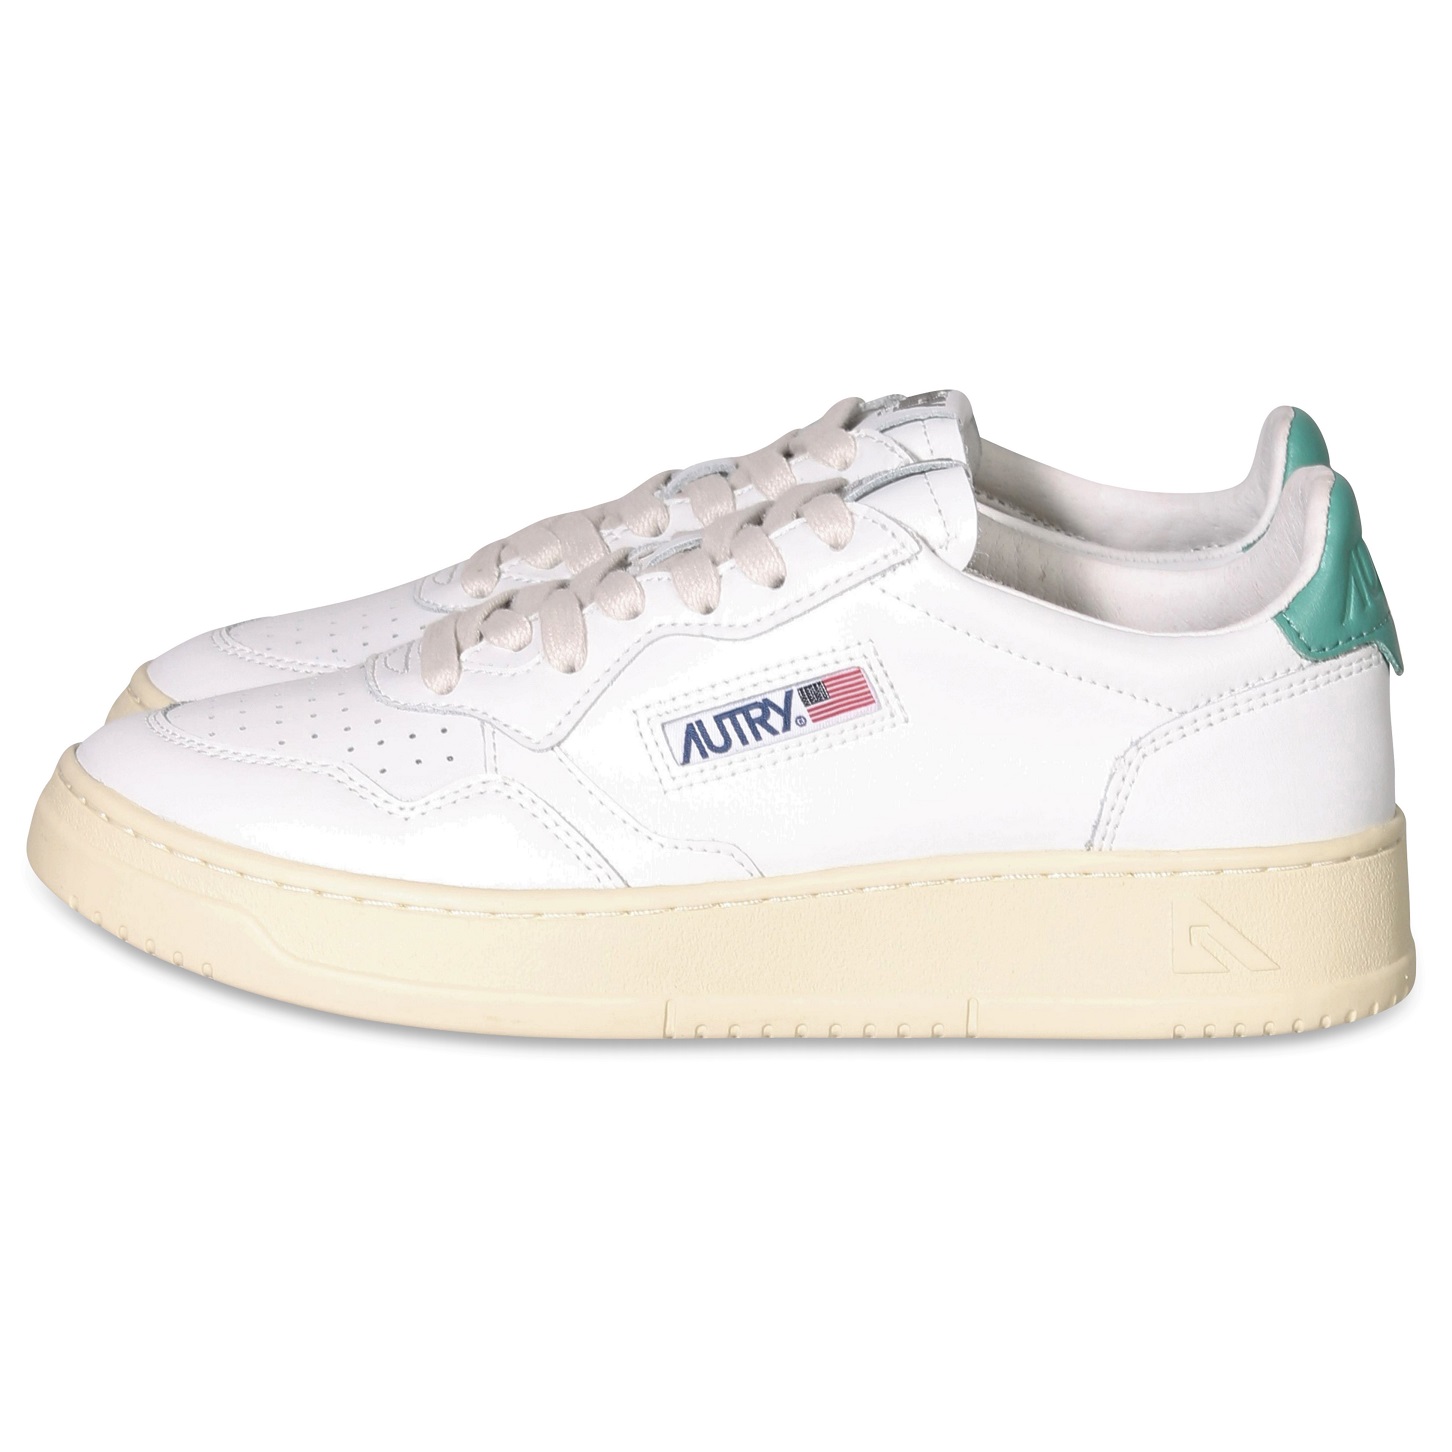 AUTRY ACTION SHOES Sneaker Low in White/Malachi Green